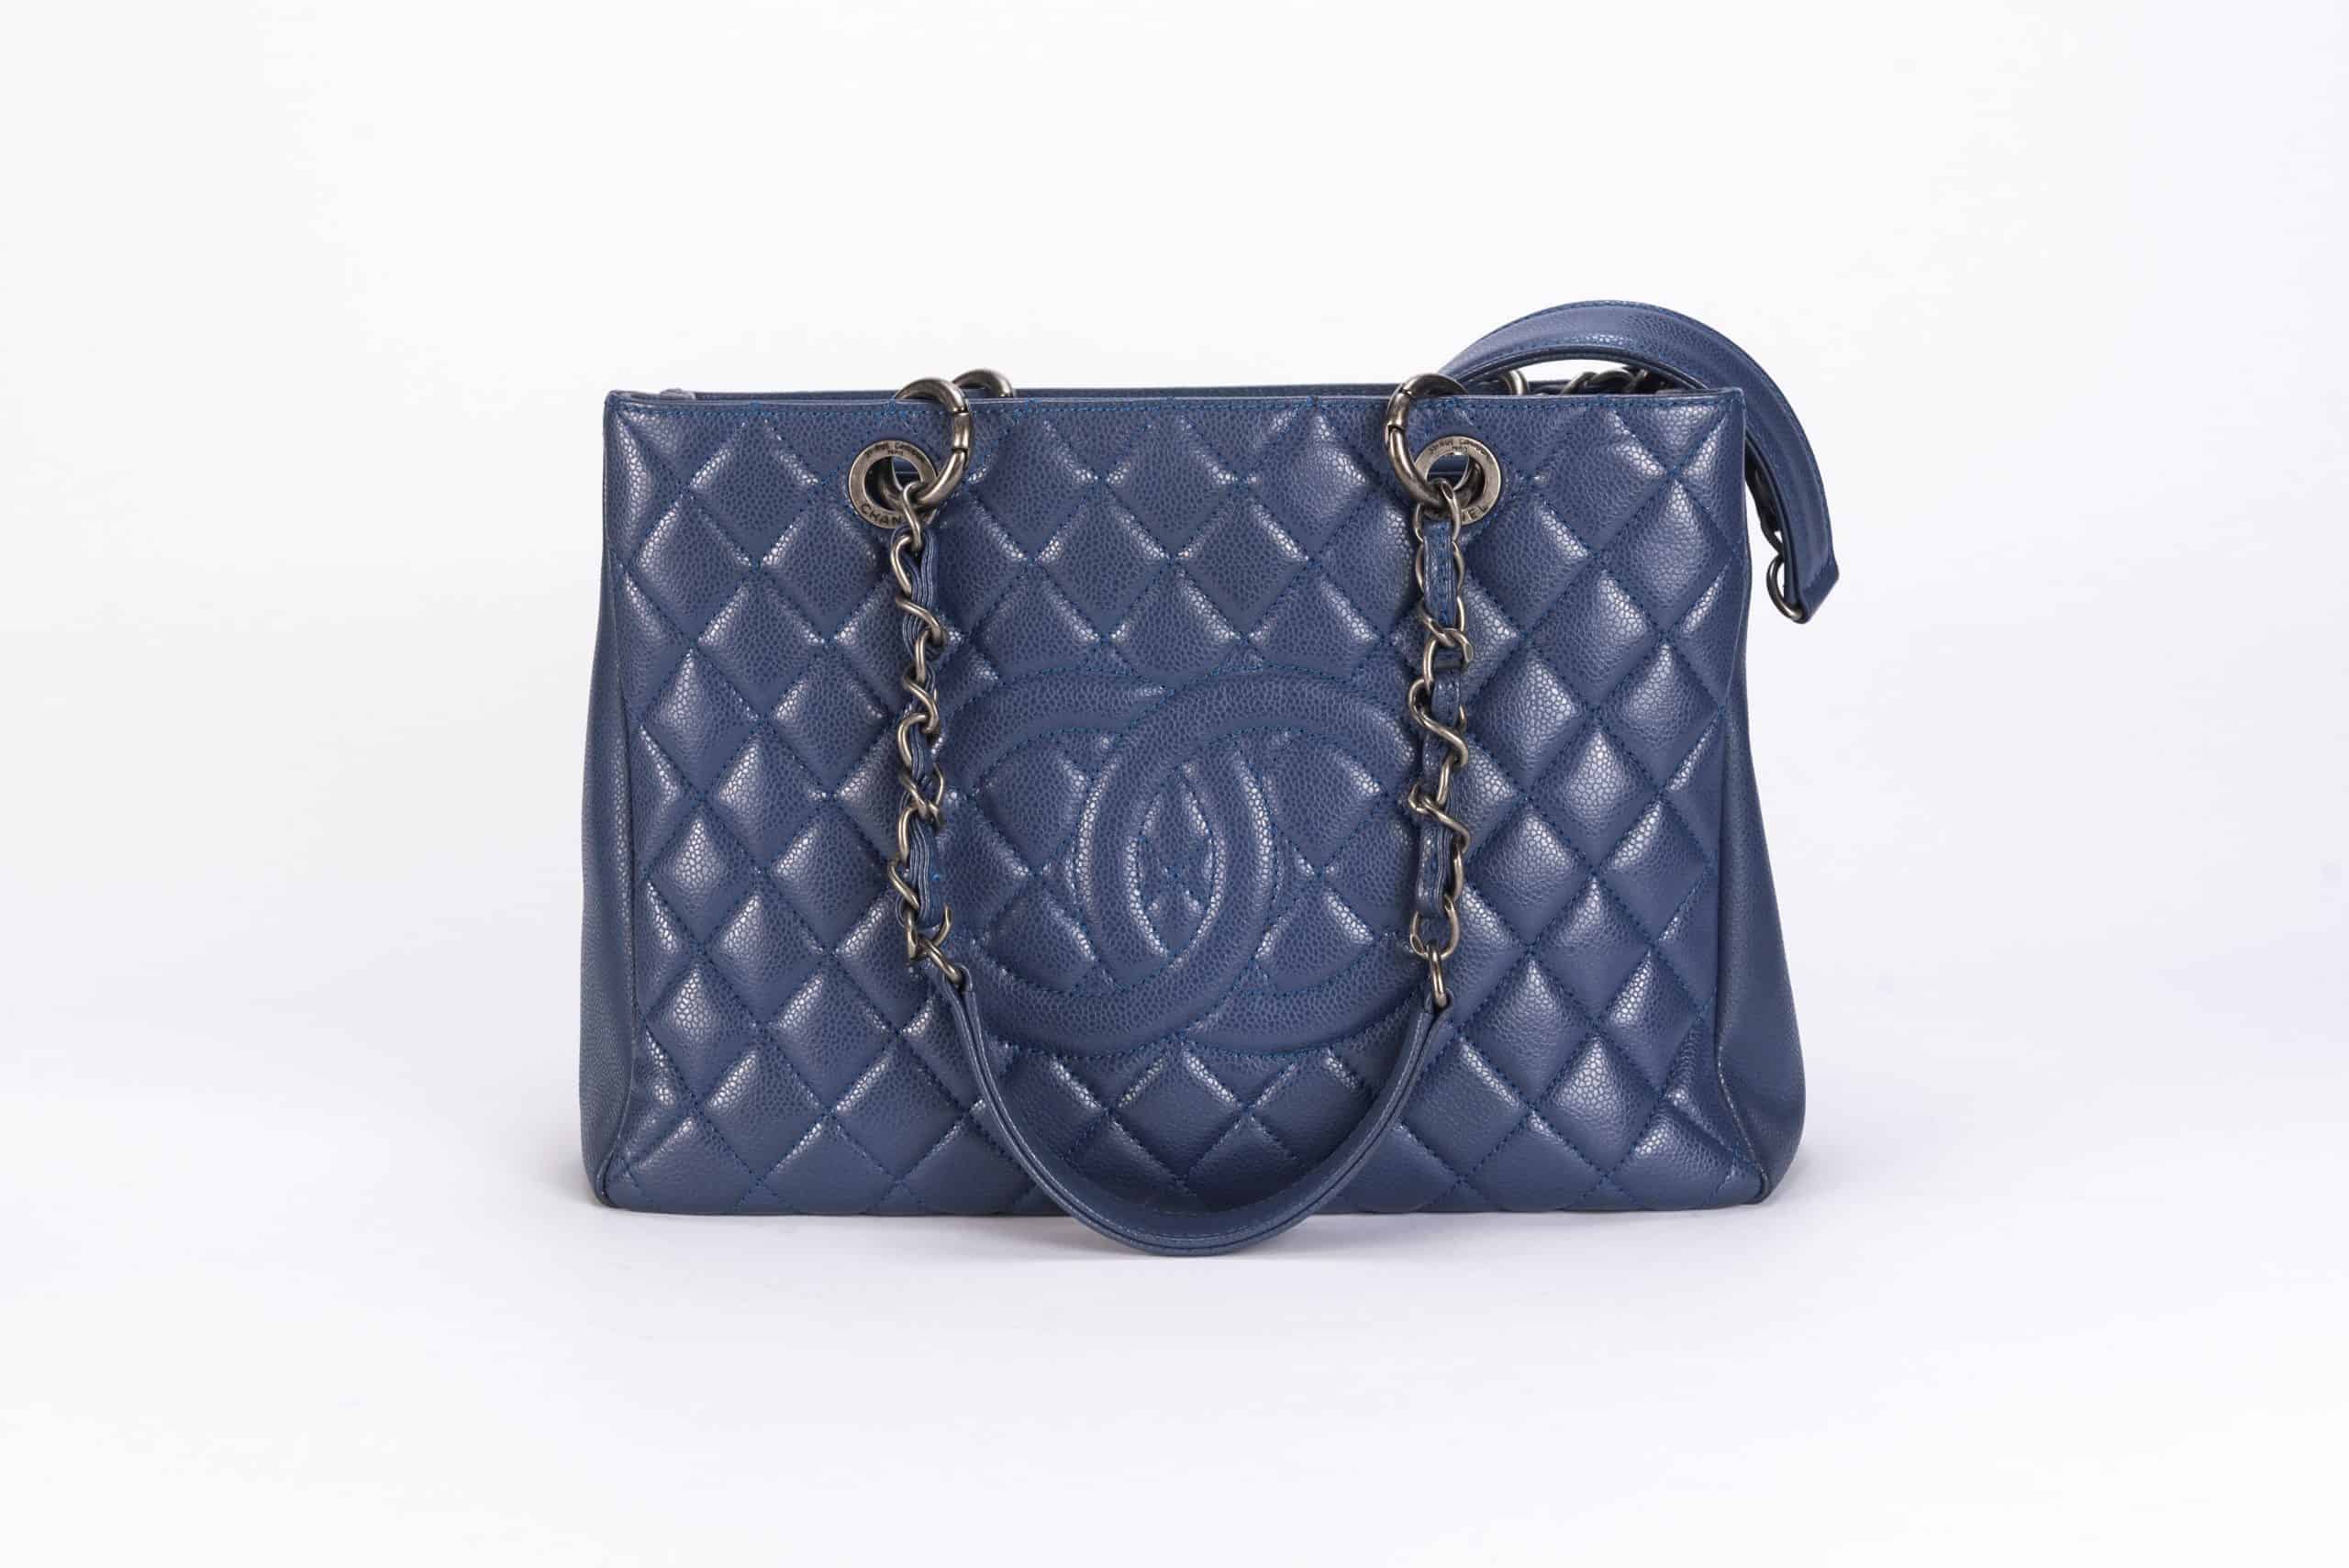 Chanel GST Caviar Quilted Bag in Royal Blue with Rhodium Hardware - 1